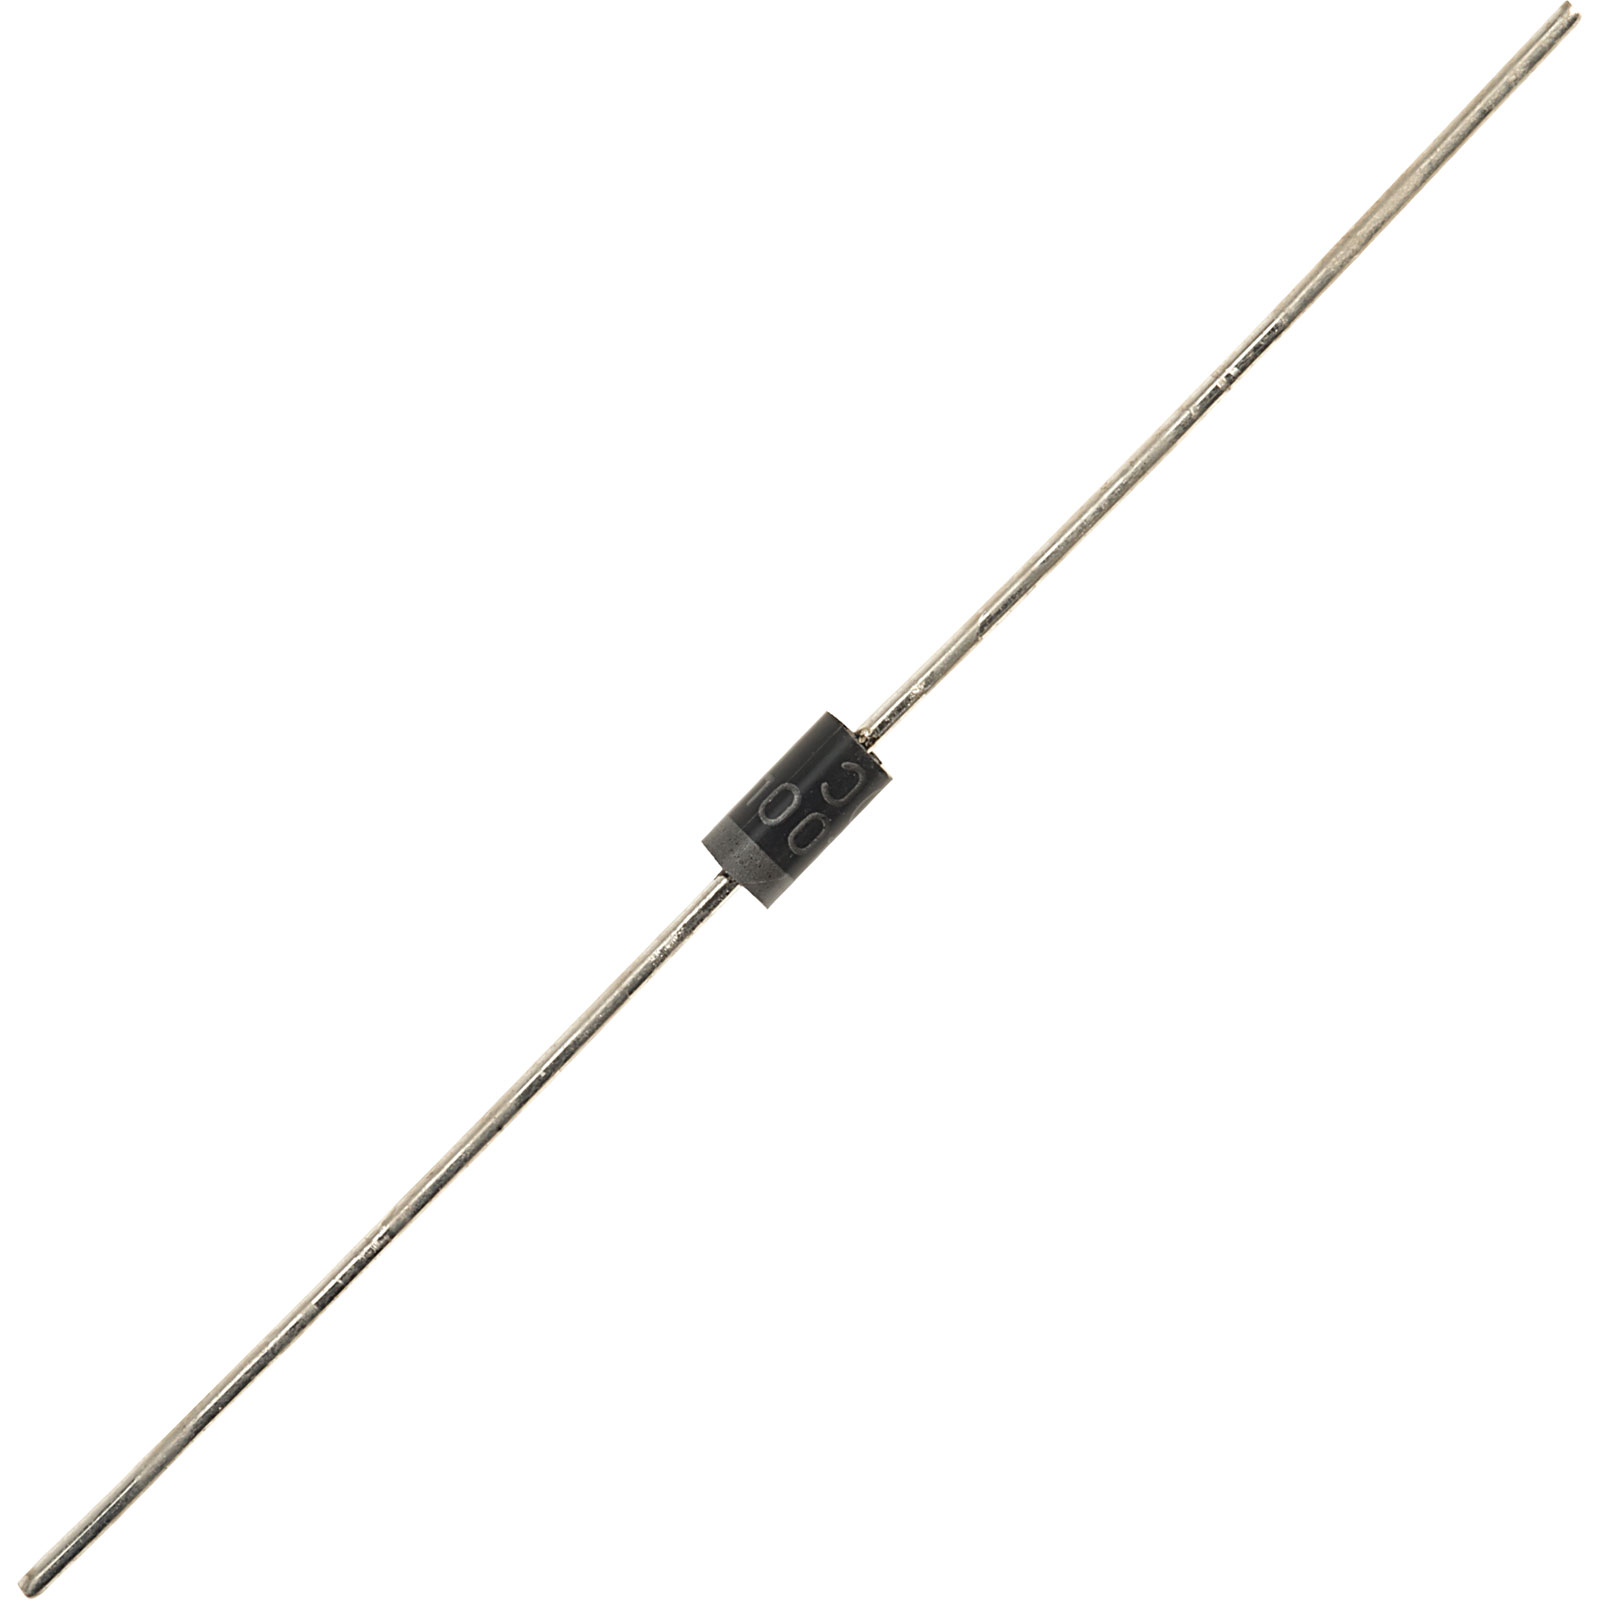 1n4004. In 4500 DC Diode. In 4500 DC Diode альтернатива. Диод uf4004 характеристики на русском.